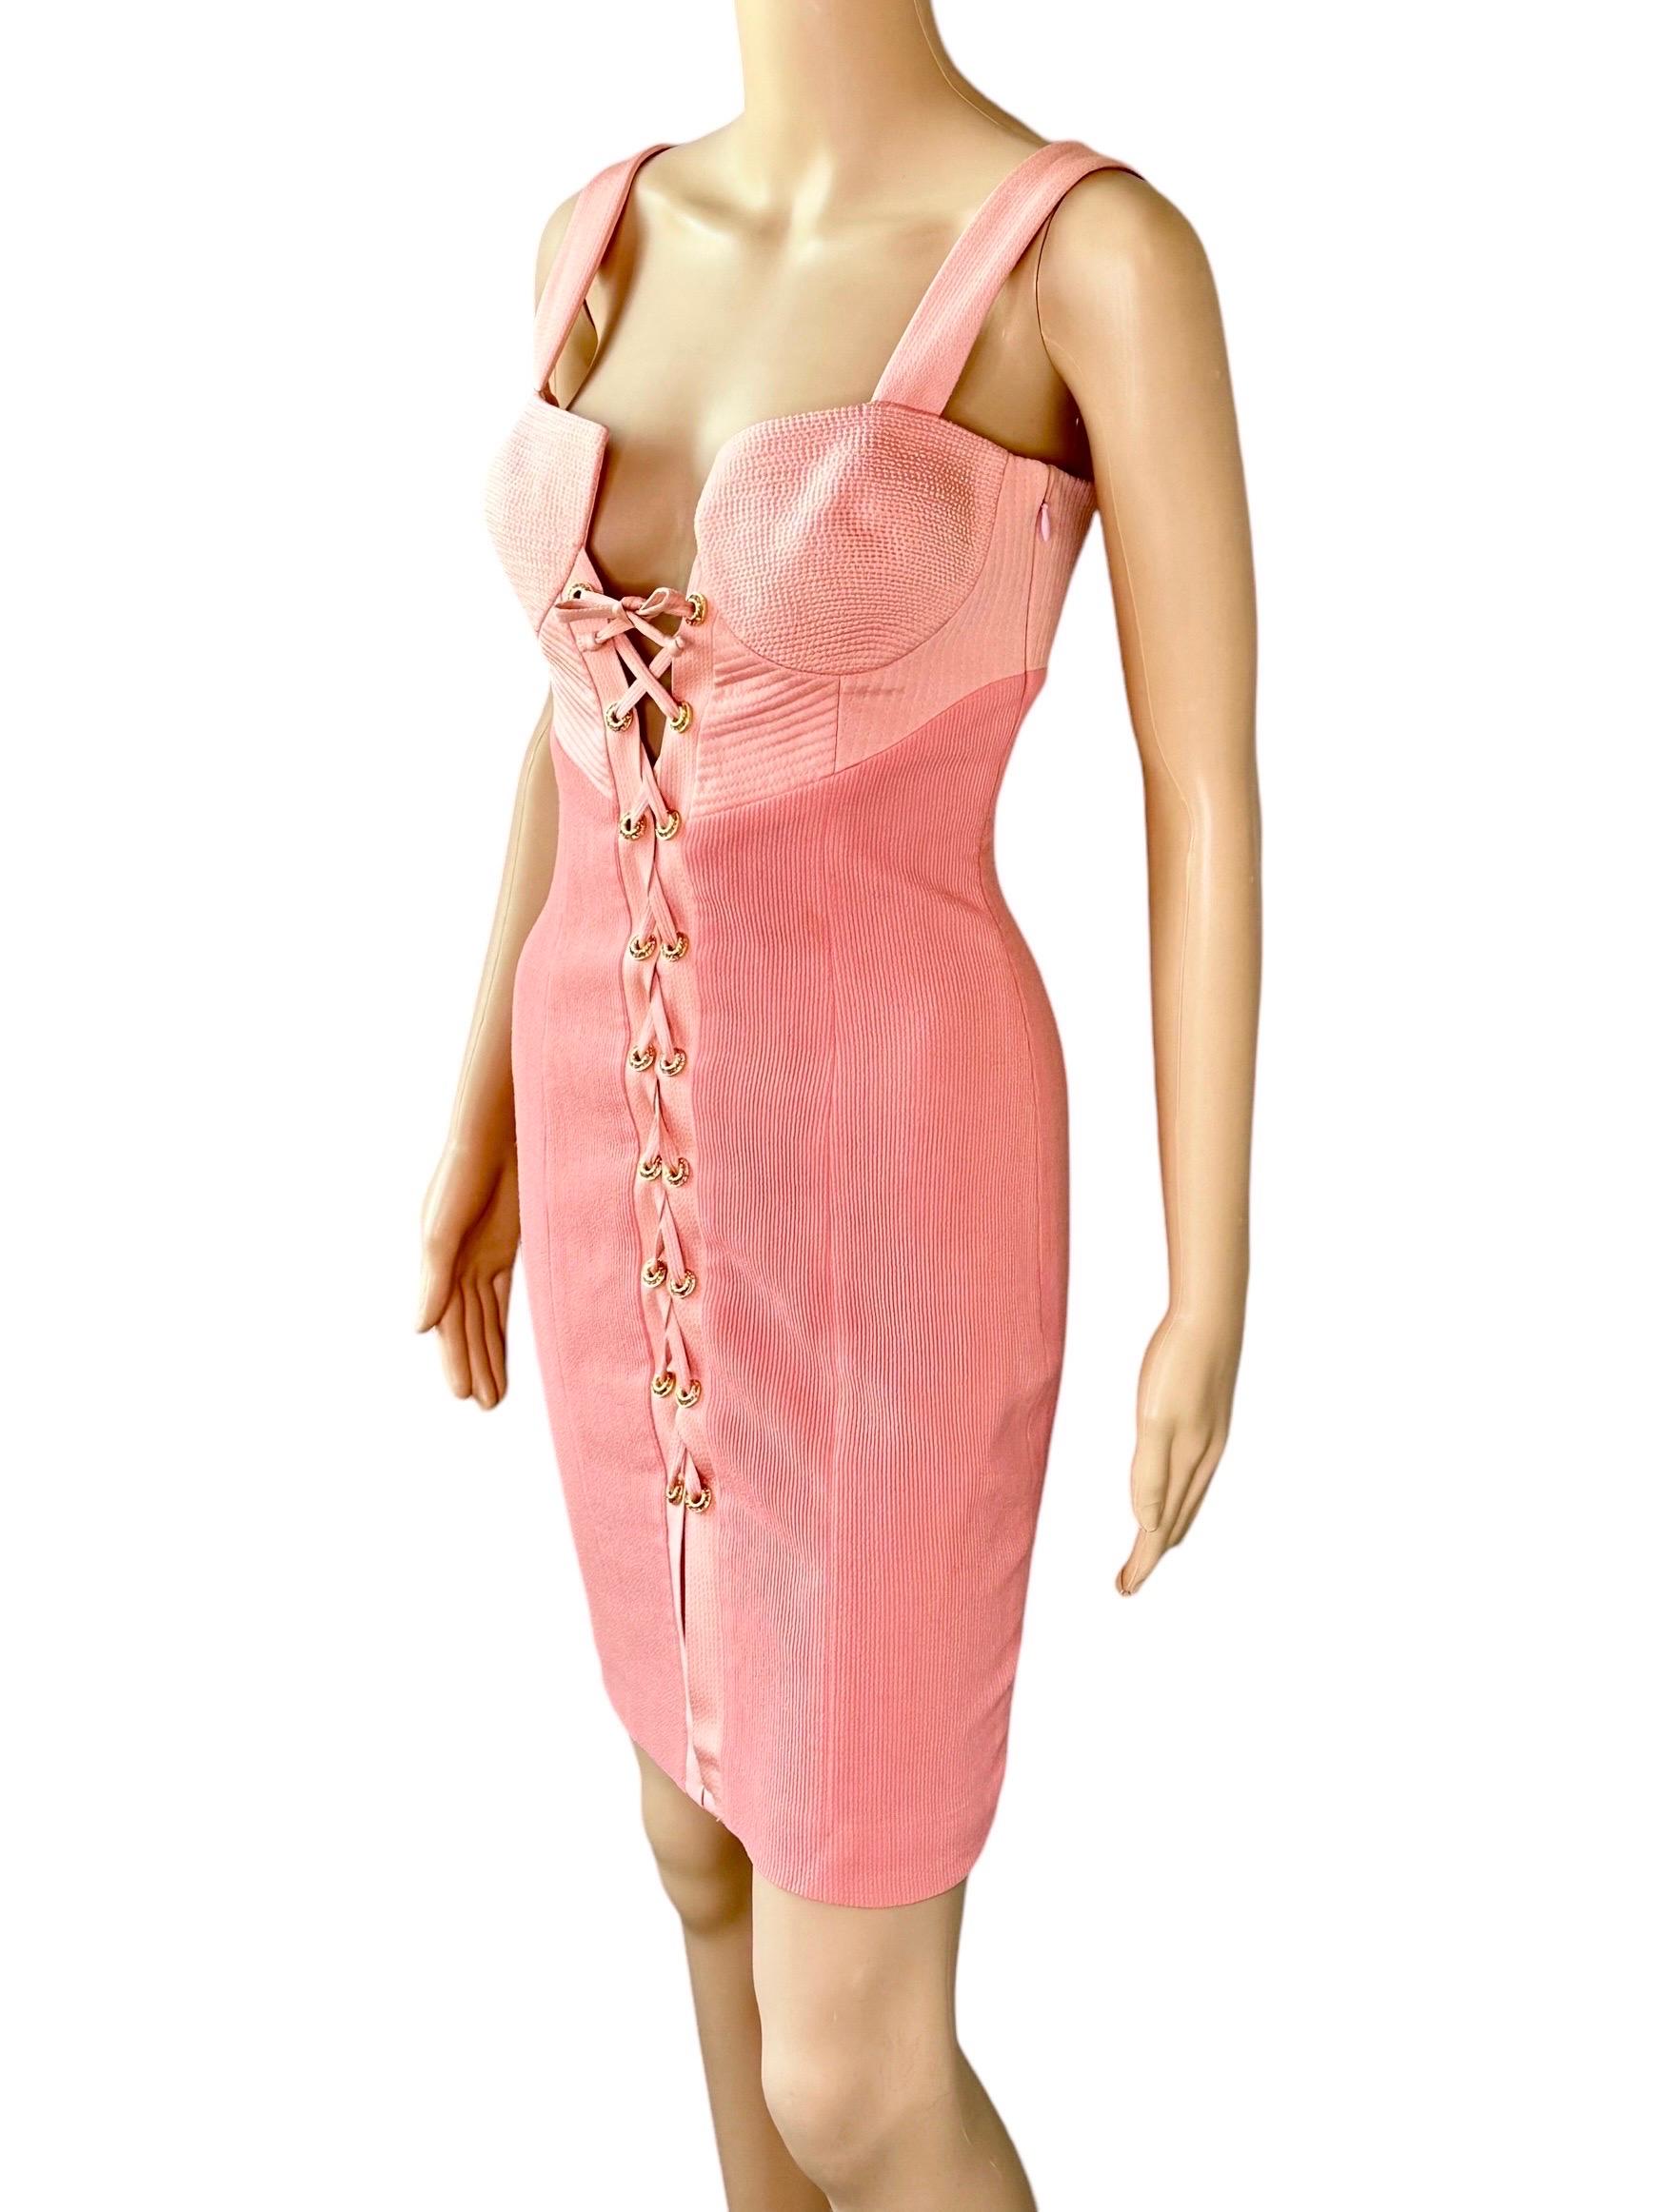 Gianni Versace S/S 1992 Couture Bustier Corset Lace Up Mini Dress For Sale 4